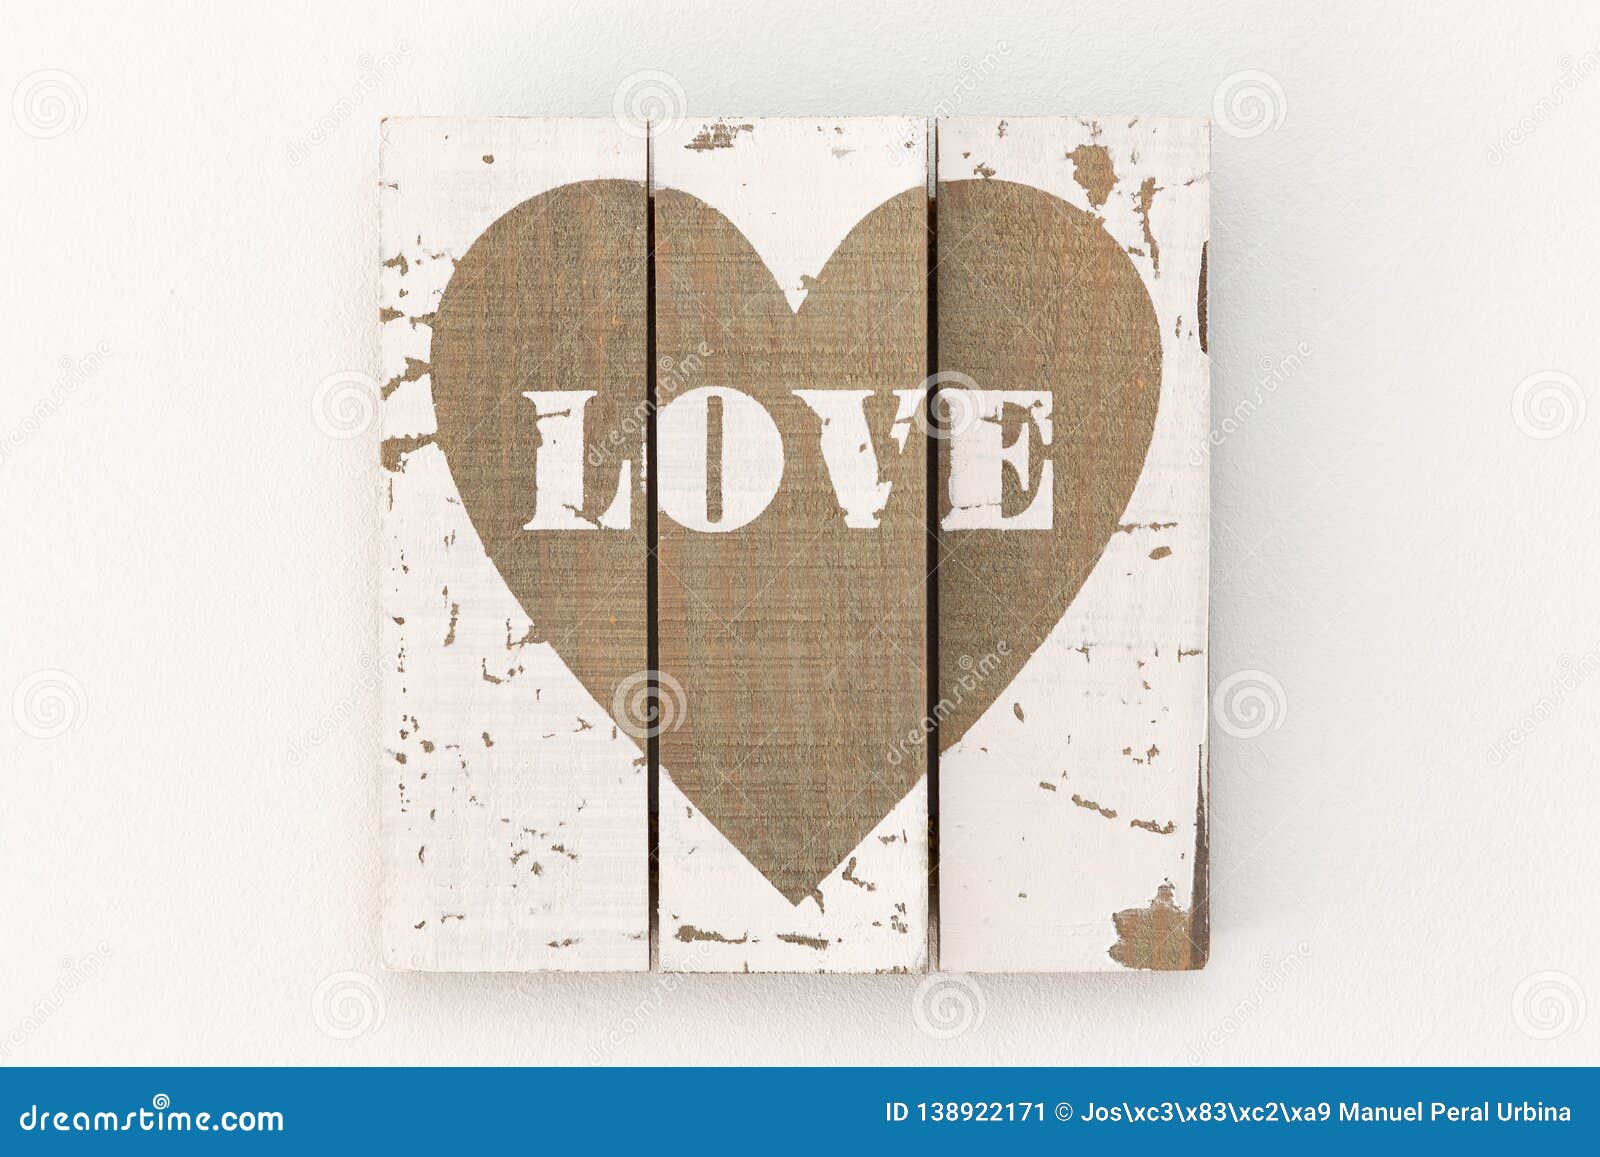 picture of white wooden boards and painted brown heart